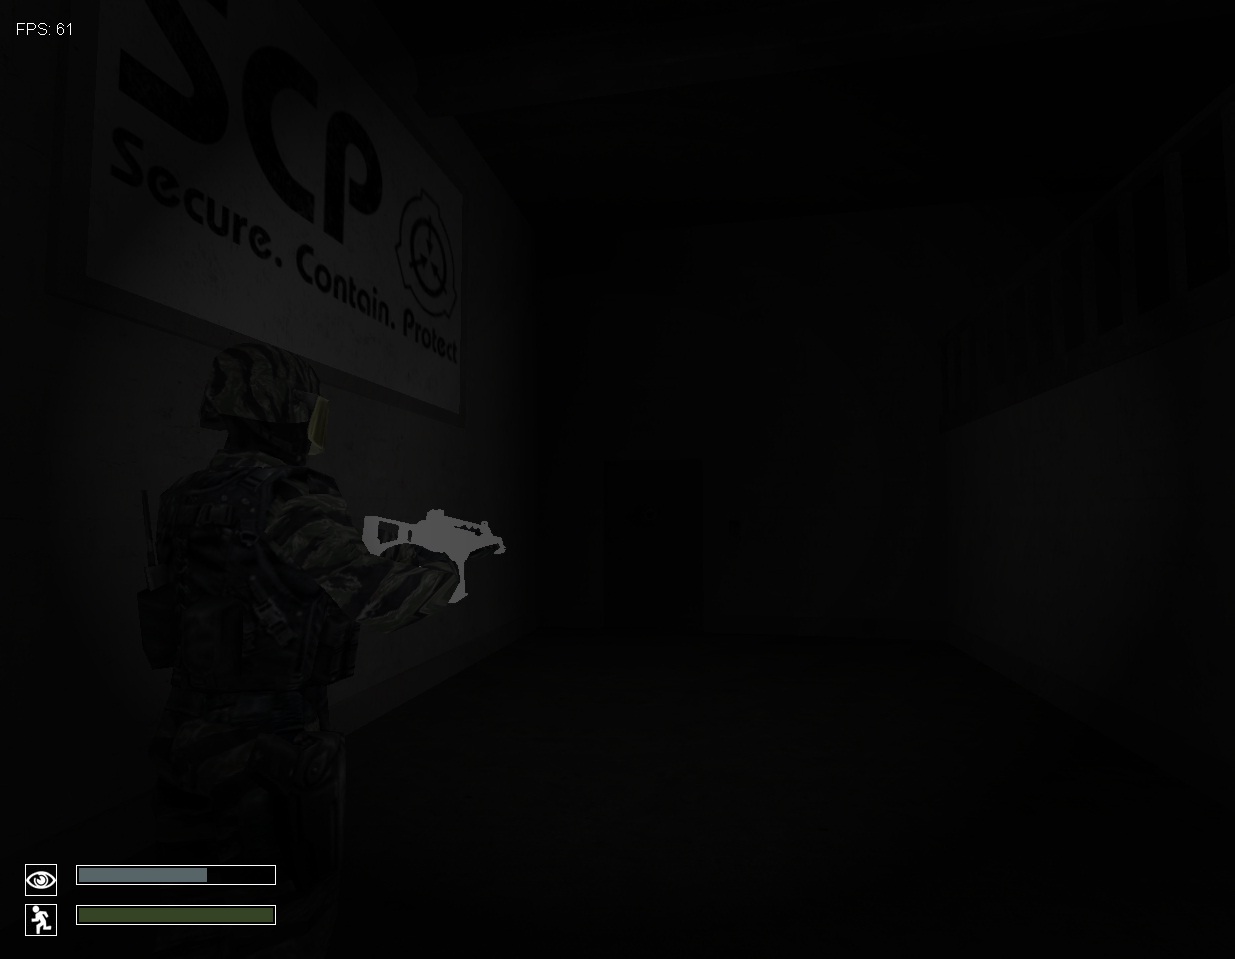 SCP Containment Breach: Revival - v0.2.0 Update - Free - Release